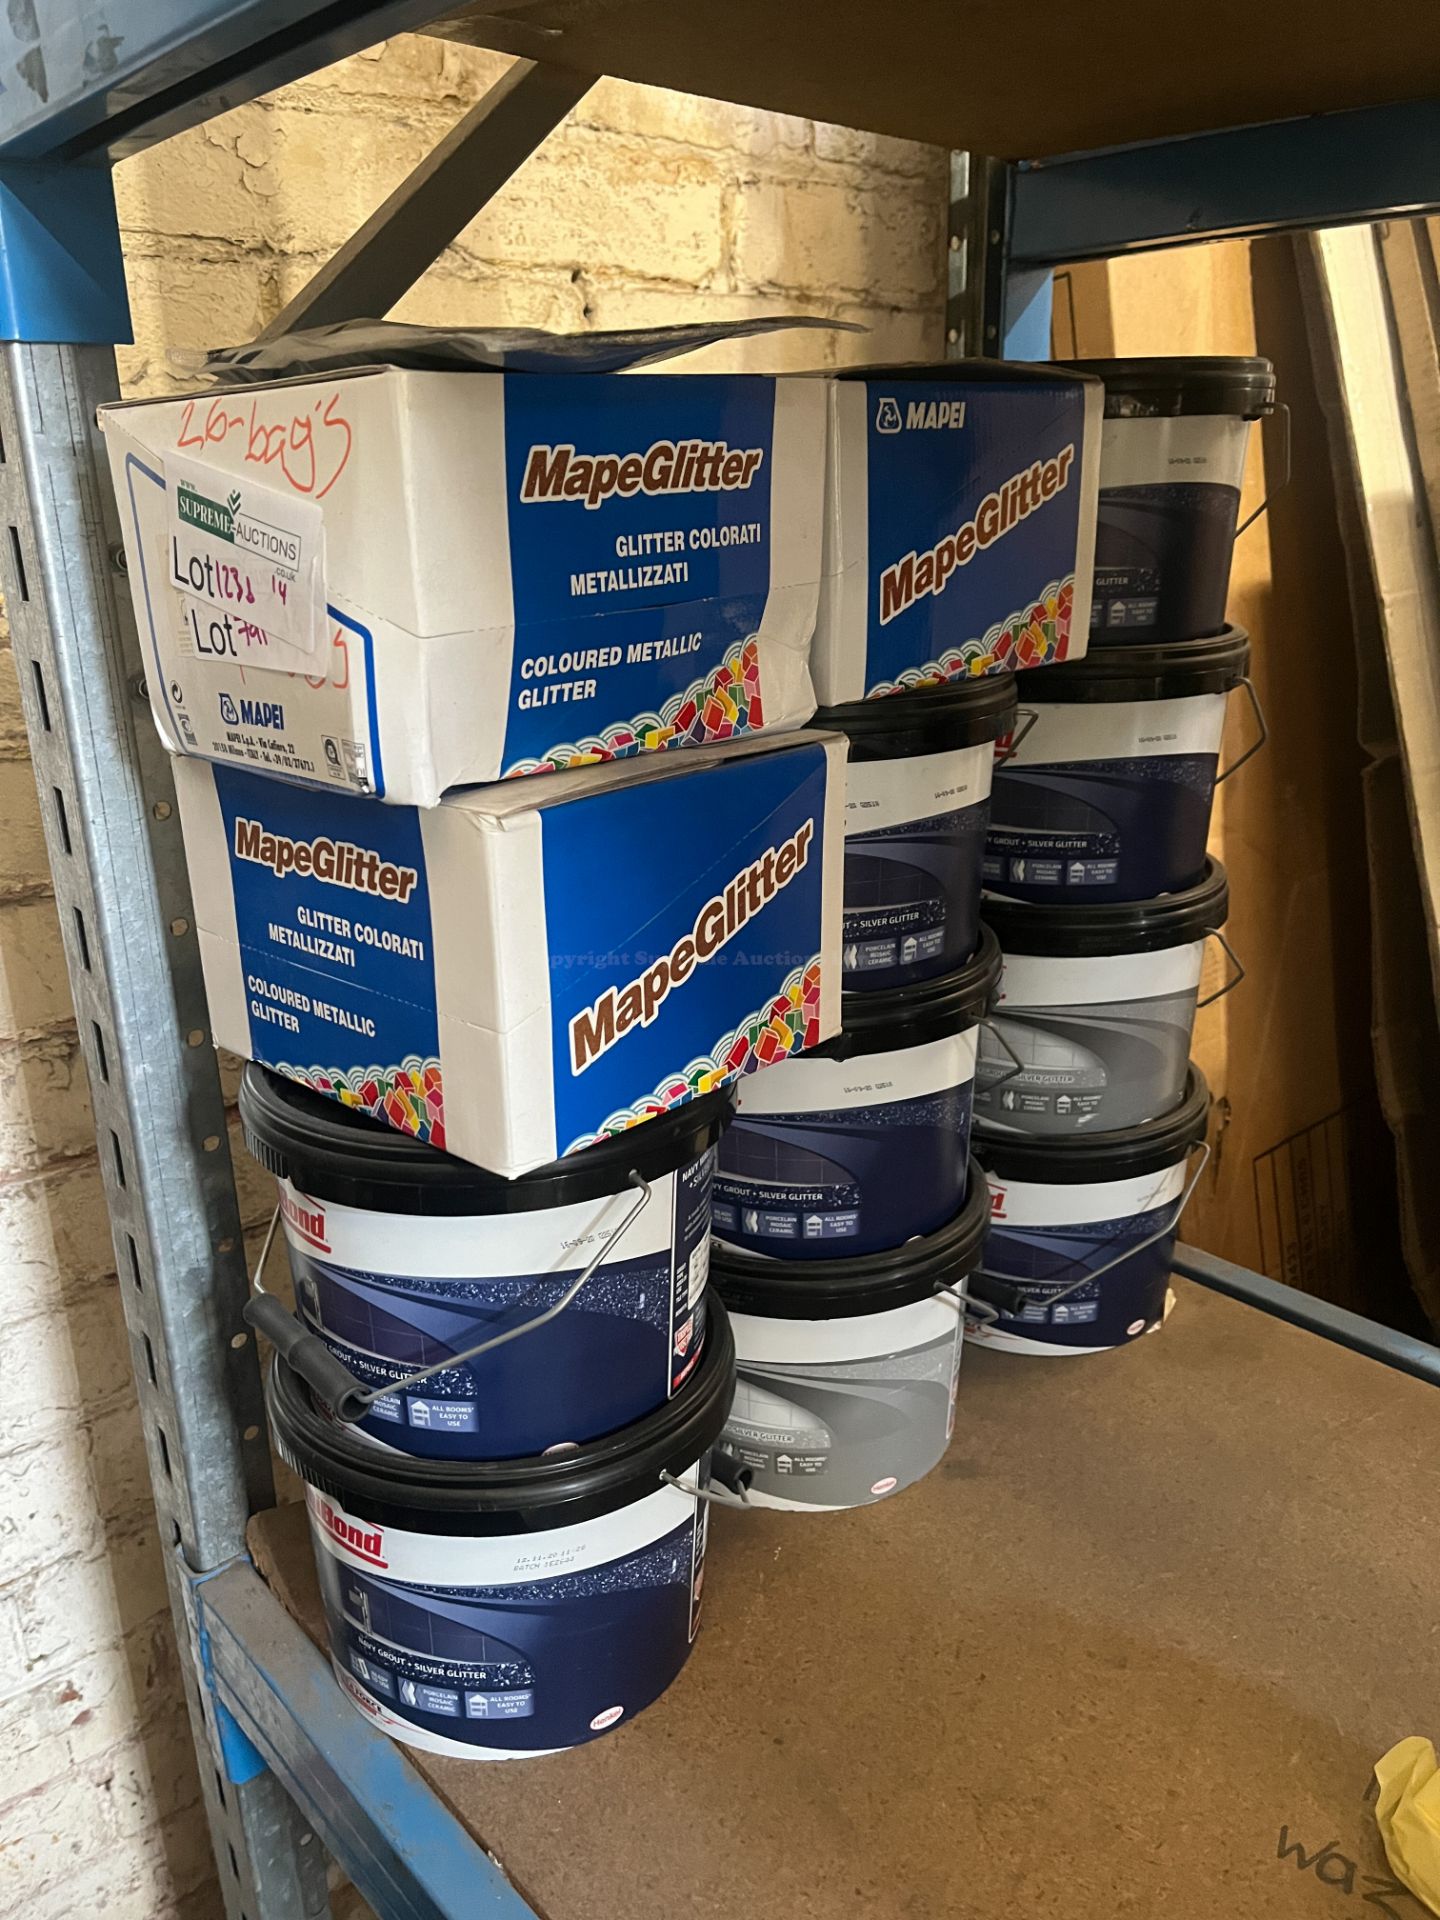 35 PIECE MIXED LOT INCLUDING MAPEI GLITTER BAGS AND UNIBOND WALL TILE GROUT GLITTER S1-10